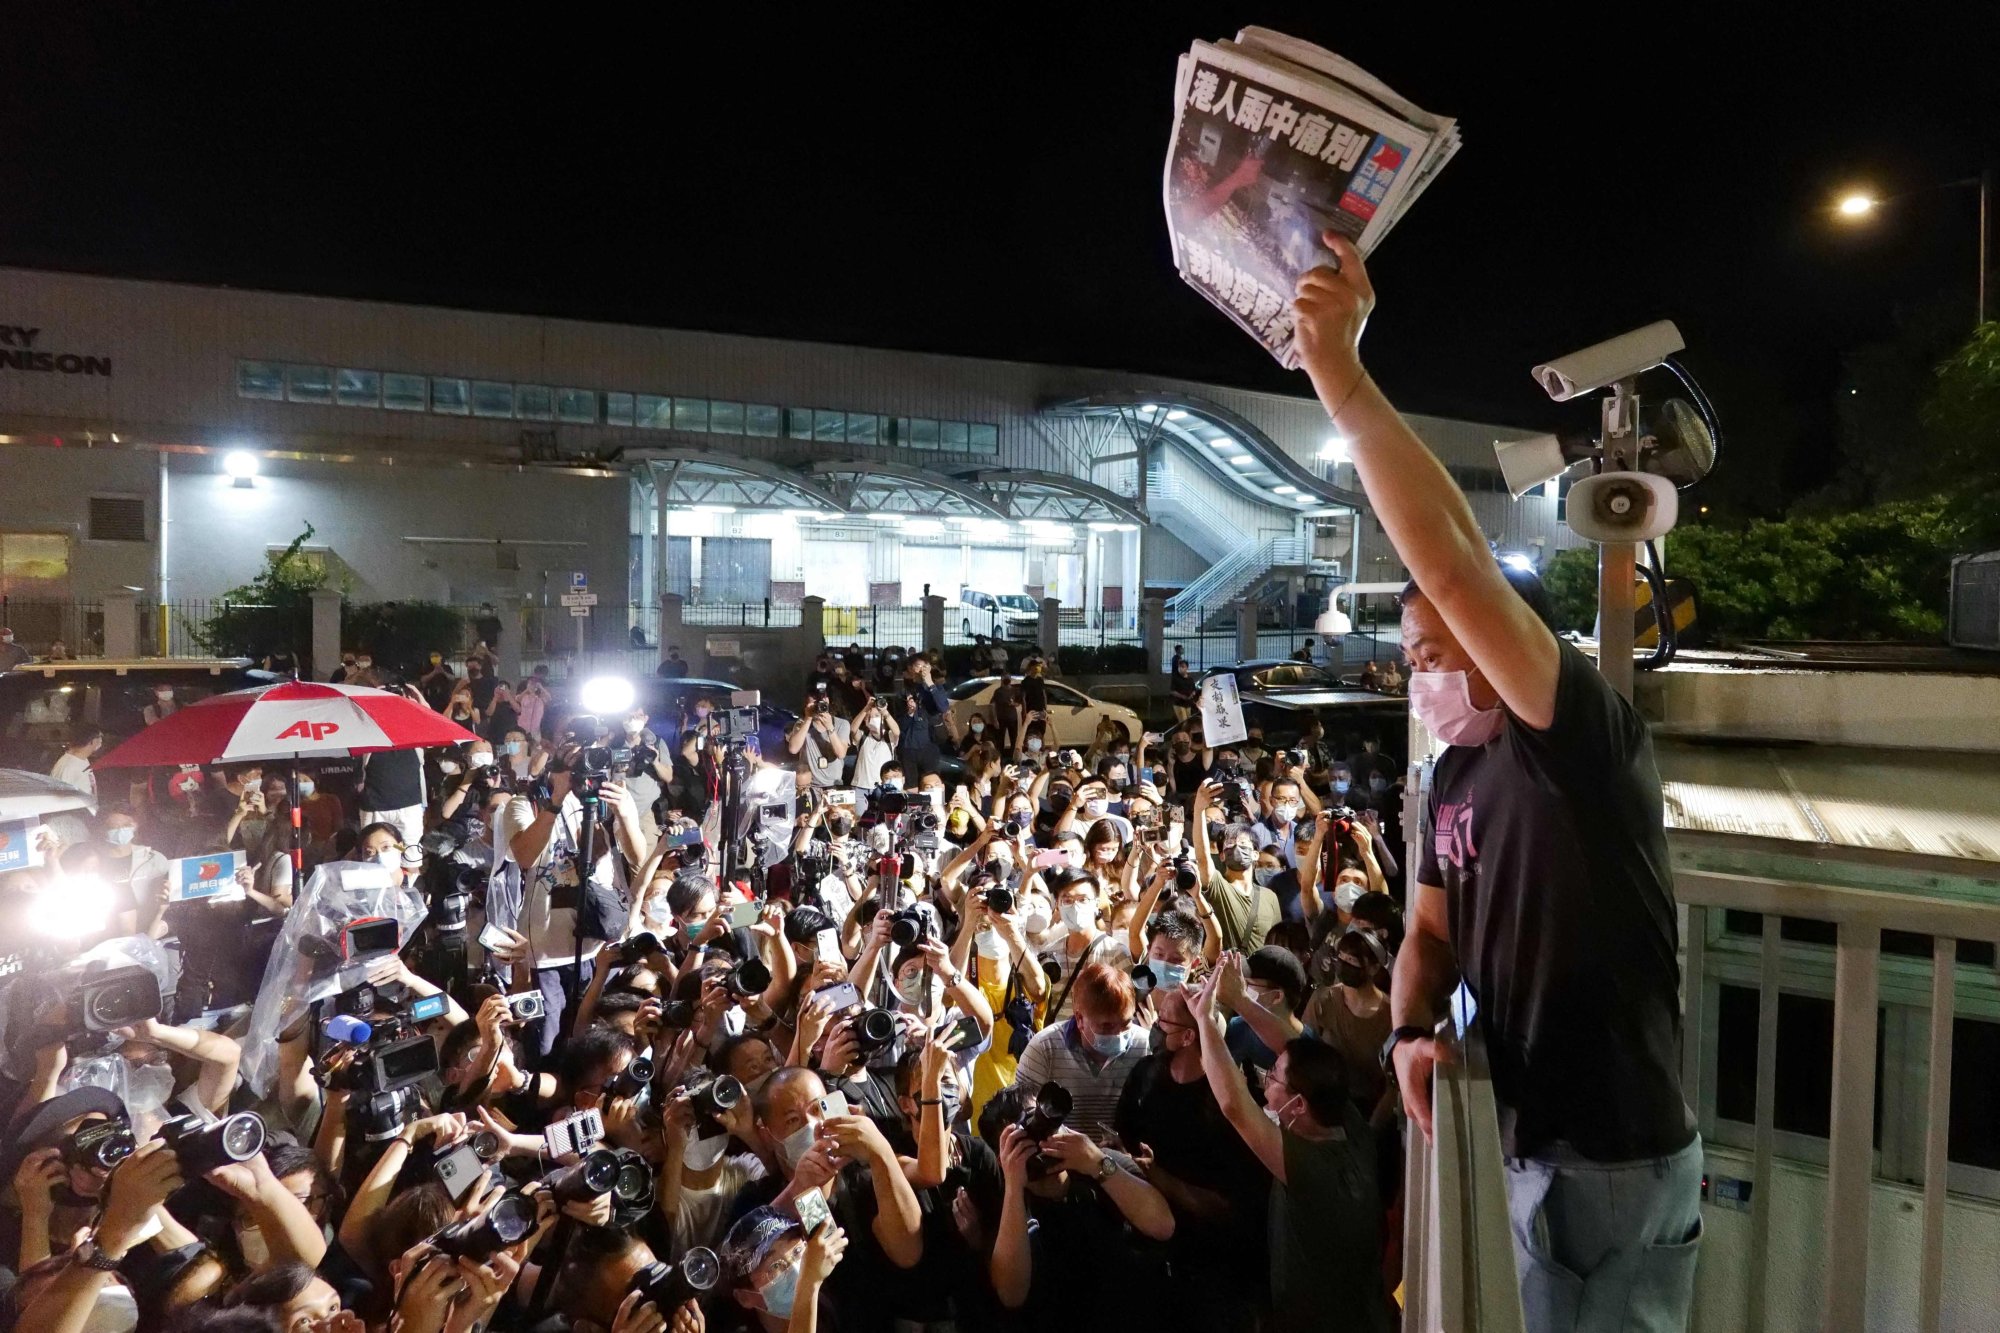 This file photo taken on June 24, 2021 shows an Apple Daily journalist holding freshly-printed copies of the newspaper’s last edition to be distributed to supporters gathered outside their office in Hong Kong, as the tabloid was forced to close after 26 years. Photo: AFP